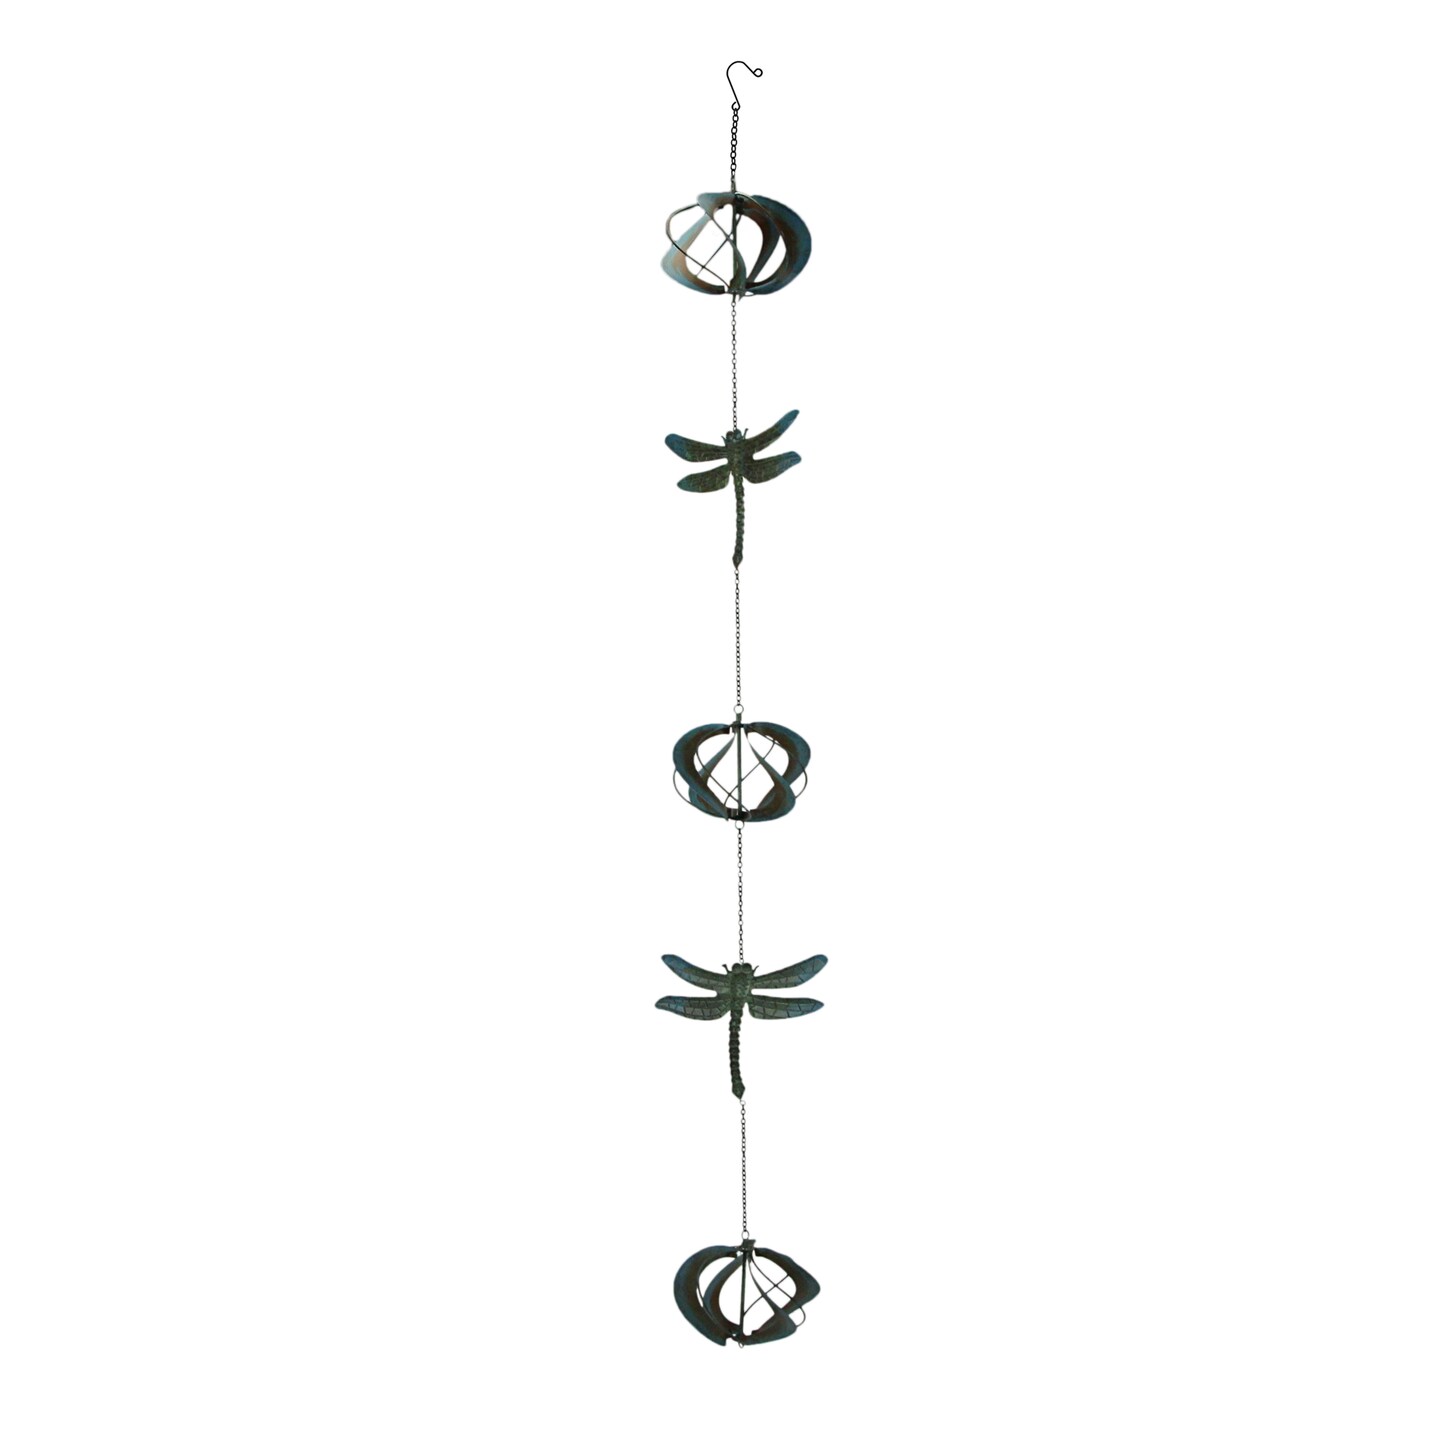 Metal Dragonfly Wind Spinner Chain Kinetic Garden Sculpture Home Decor